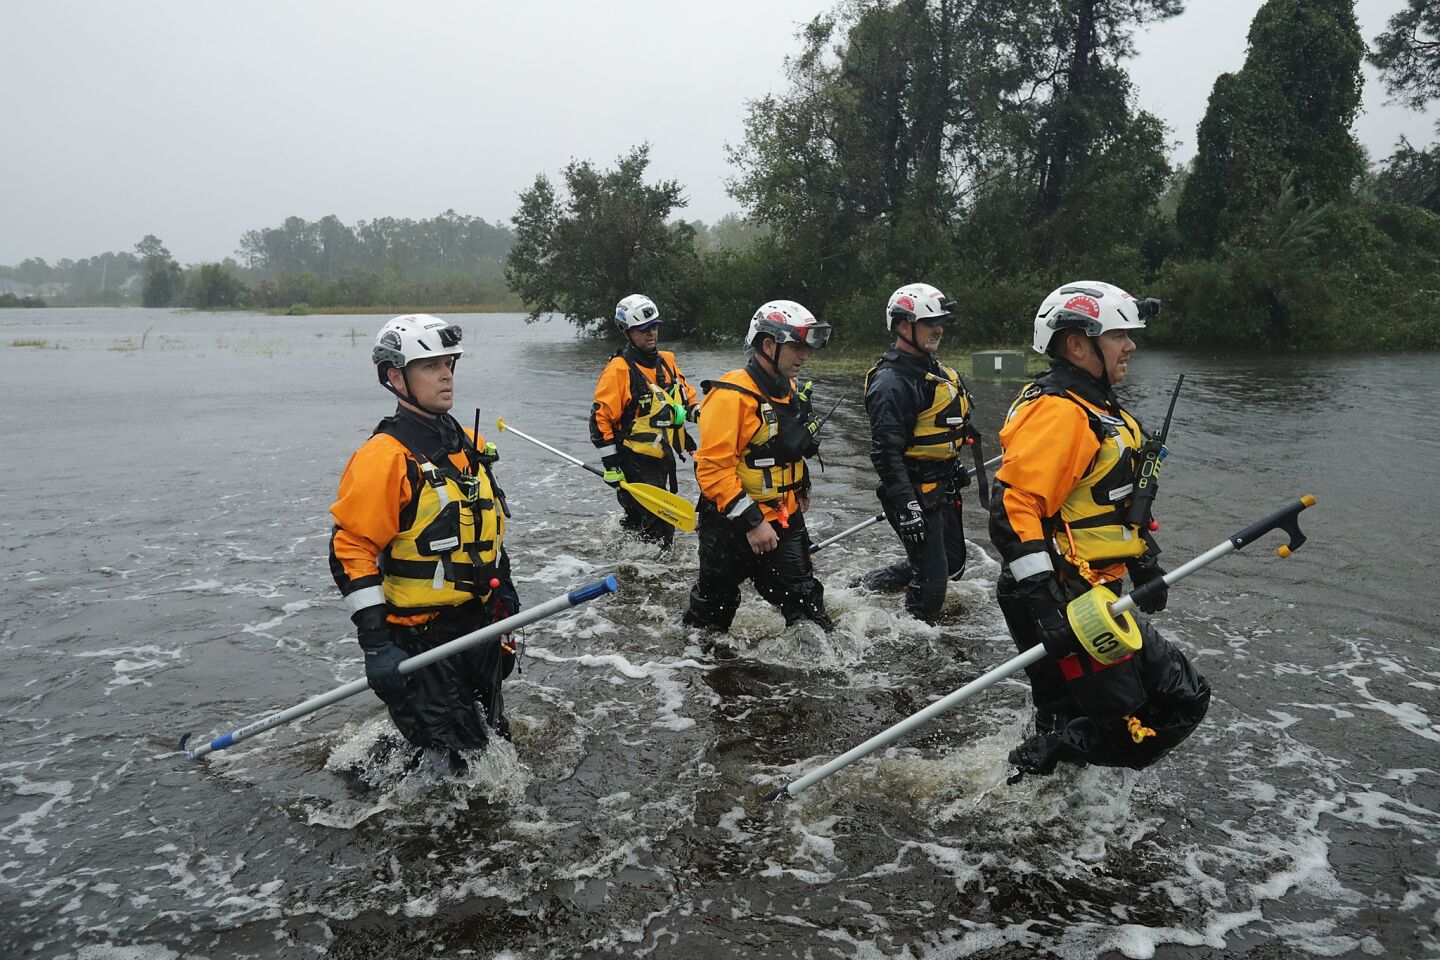 Members of the FEMA Urban Search and Rescue Task Force 4 from Oakland search a flooded neighborhood for evacuees in Fairfield Harbour, N.C.